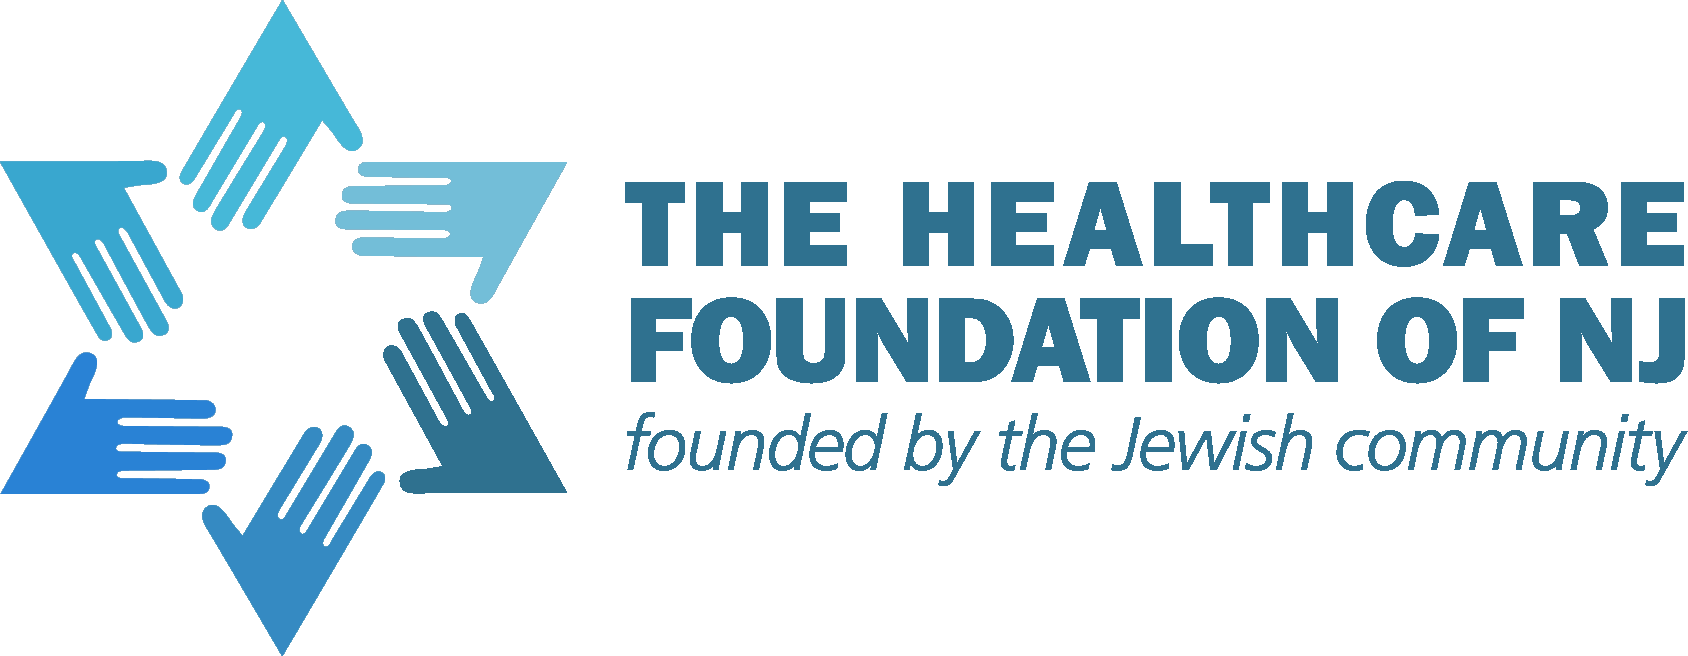 Healthcare Foundation of New Jersey